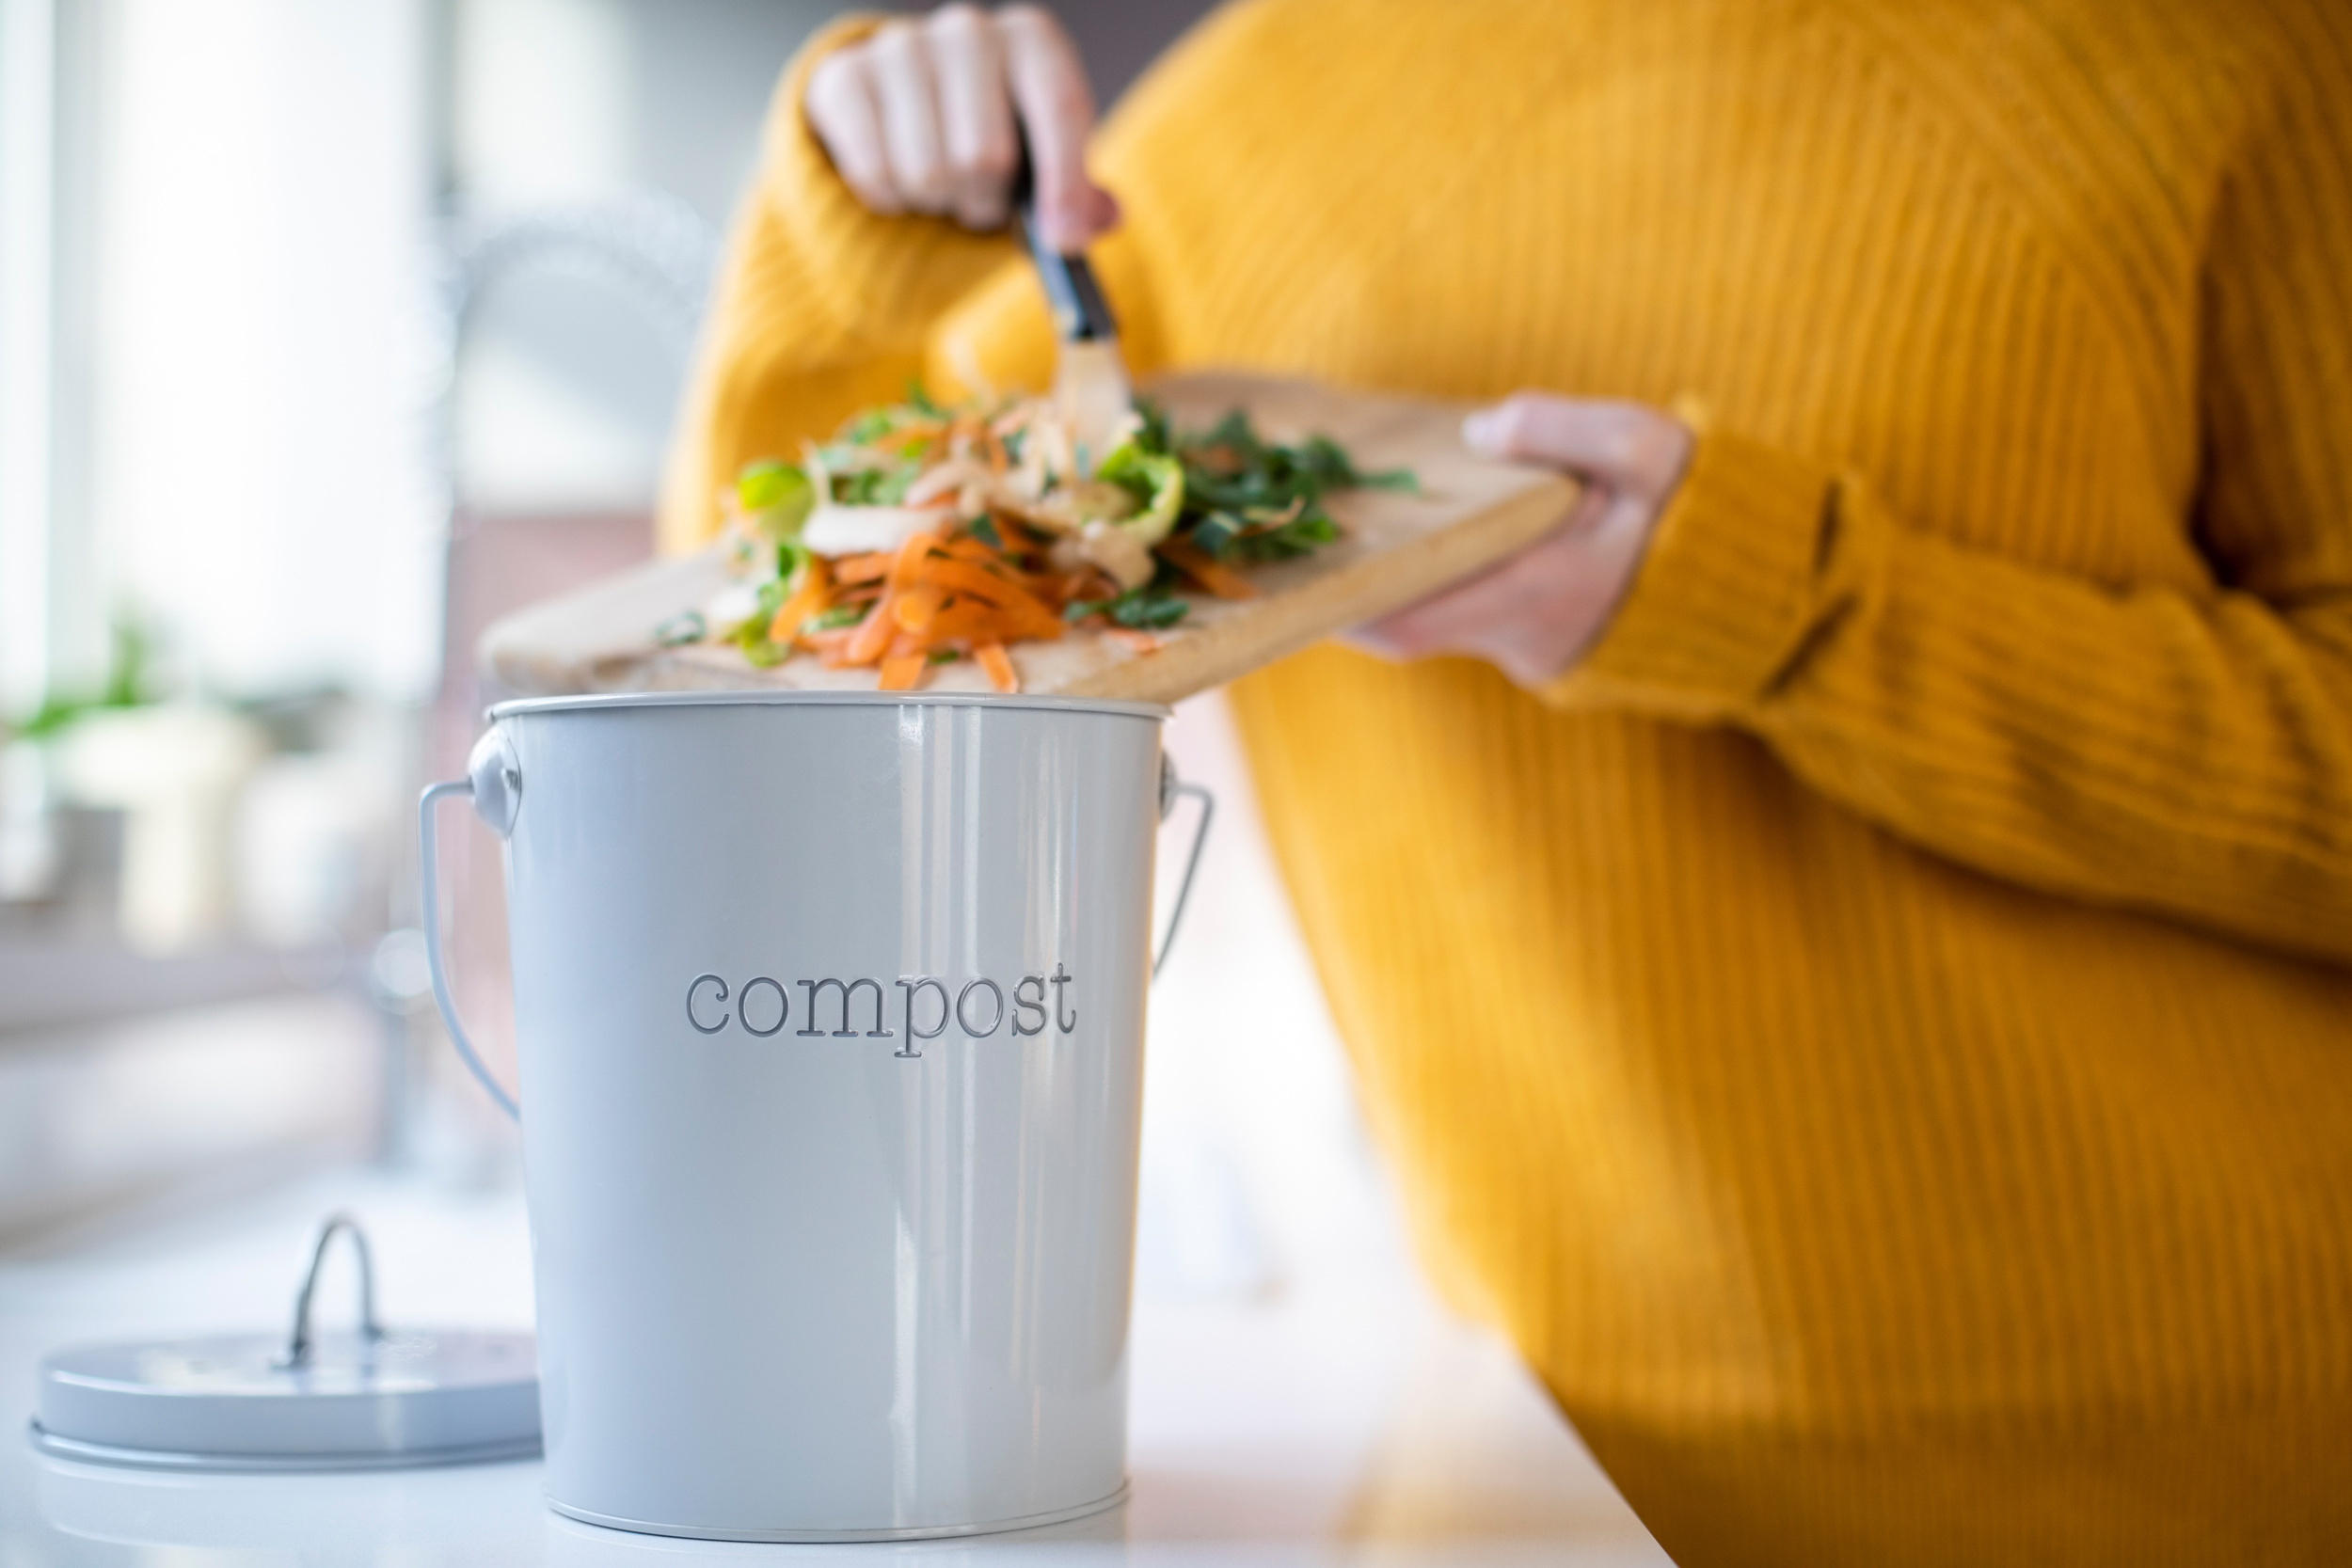 <p>If you've got a backyard, a small composting set-up can serve as an excellent way to transform leftovers and kitchen scraps like eggshells and vegetable peels into healthy fertilizer. </p>